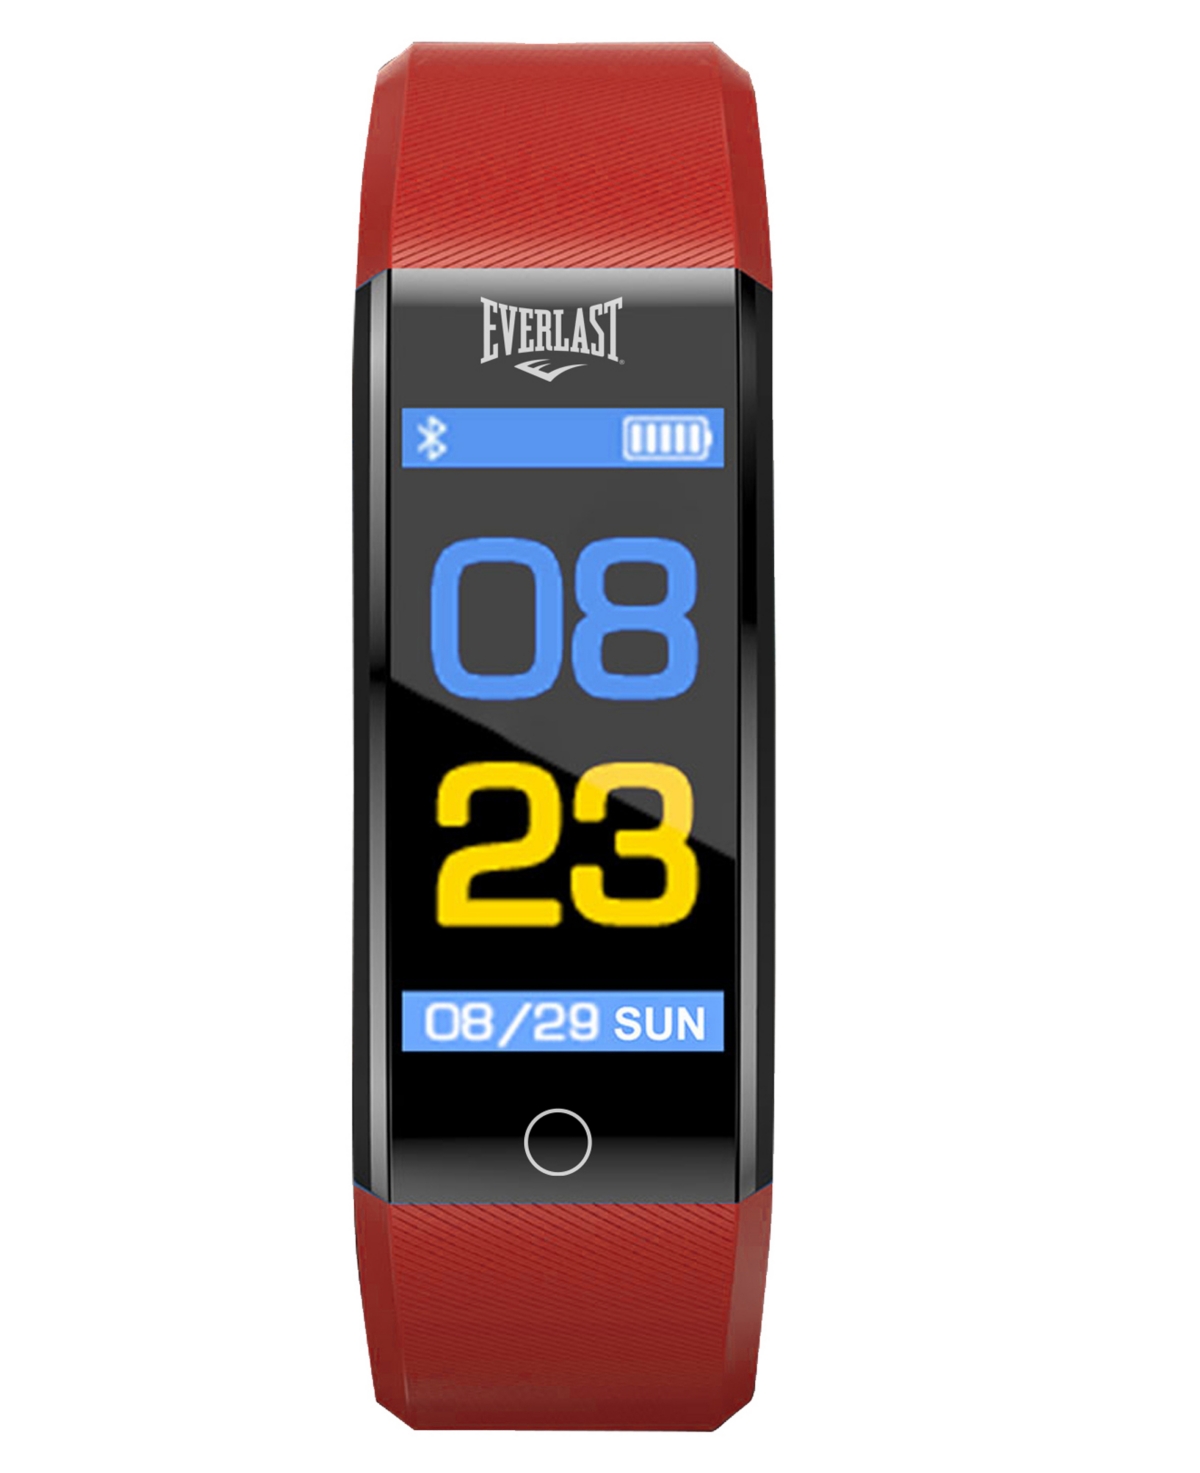 Everlast TR031 Blood Pressure and Heart Rate Monitor Activity Tracker